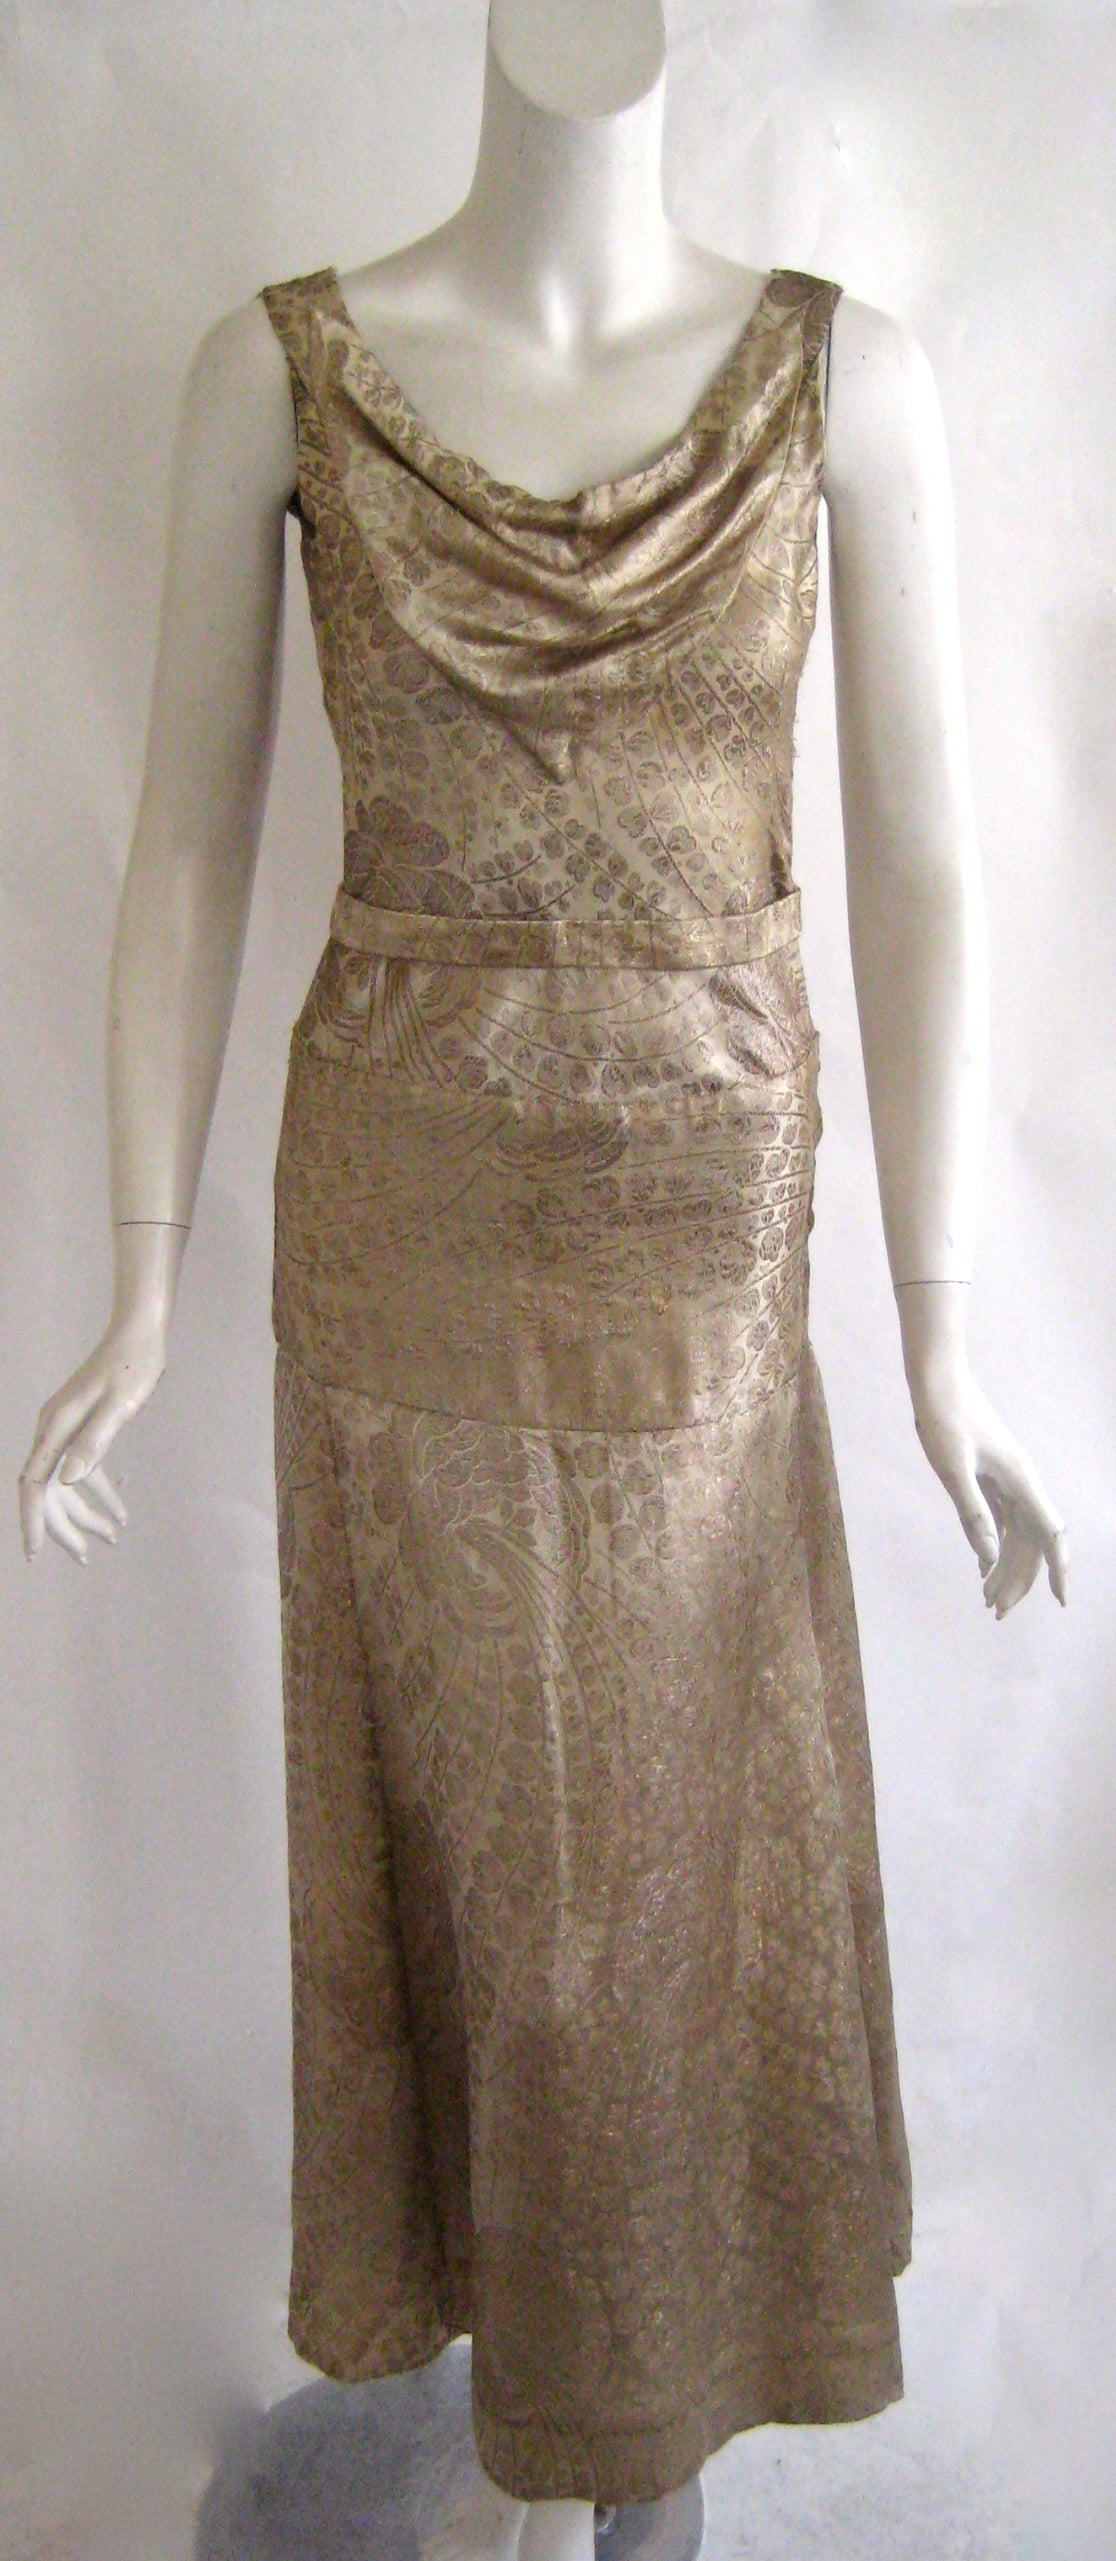 1920s silk lame evening dress with cowl neckline and attached self belt ,This closes up one side with snaps and there are no other closures.This is put together in 3 sections with bodice , skirt and  a wide swath of fabric at the hip area .The